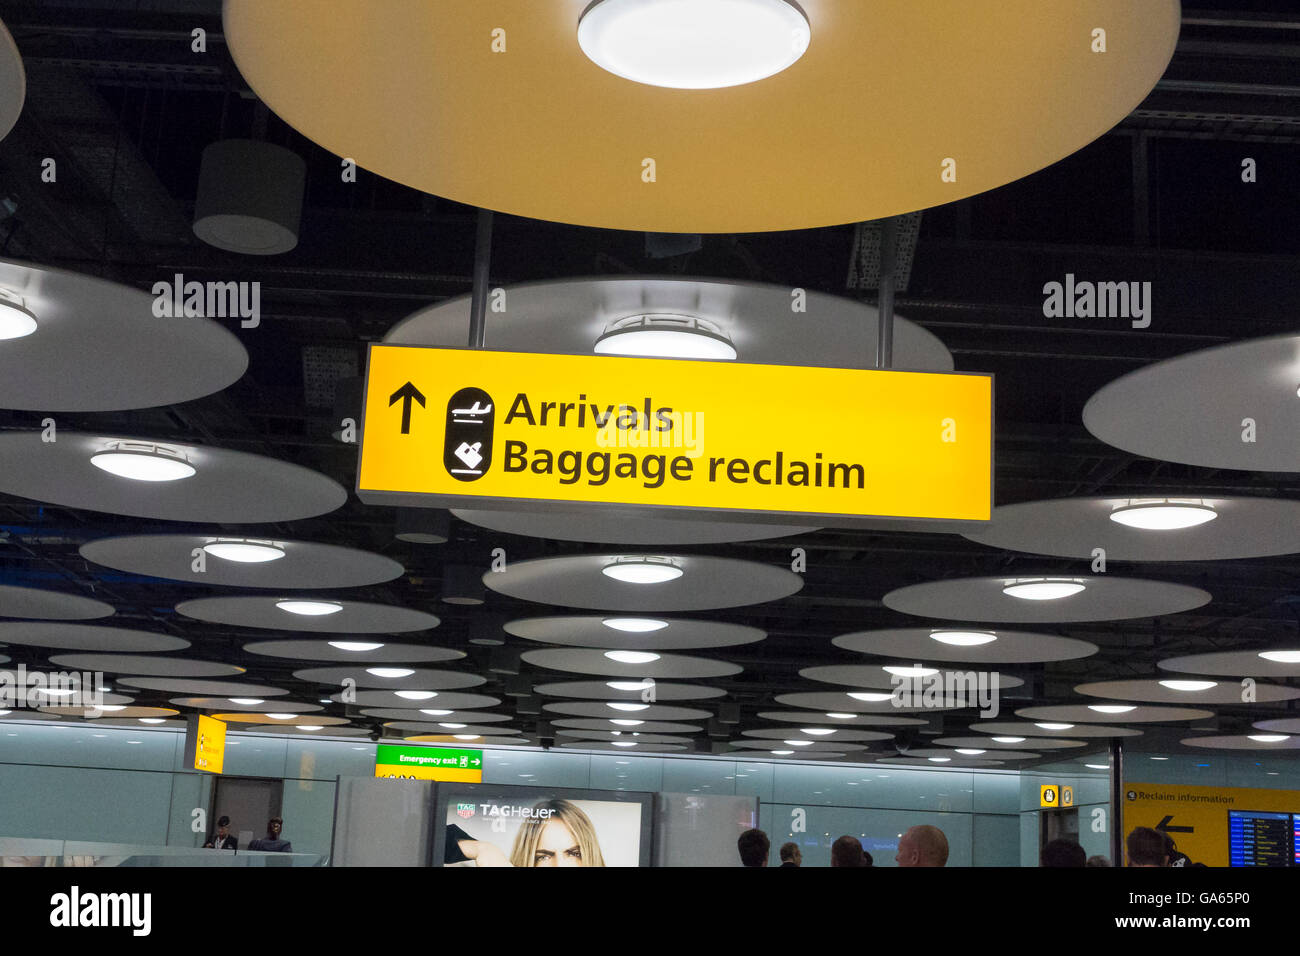 Arrivals baggage reclaim sign at a UK airport Stock Photo